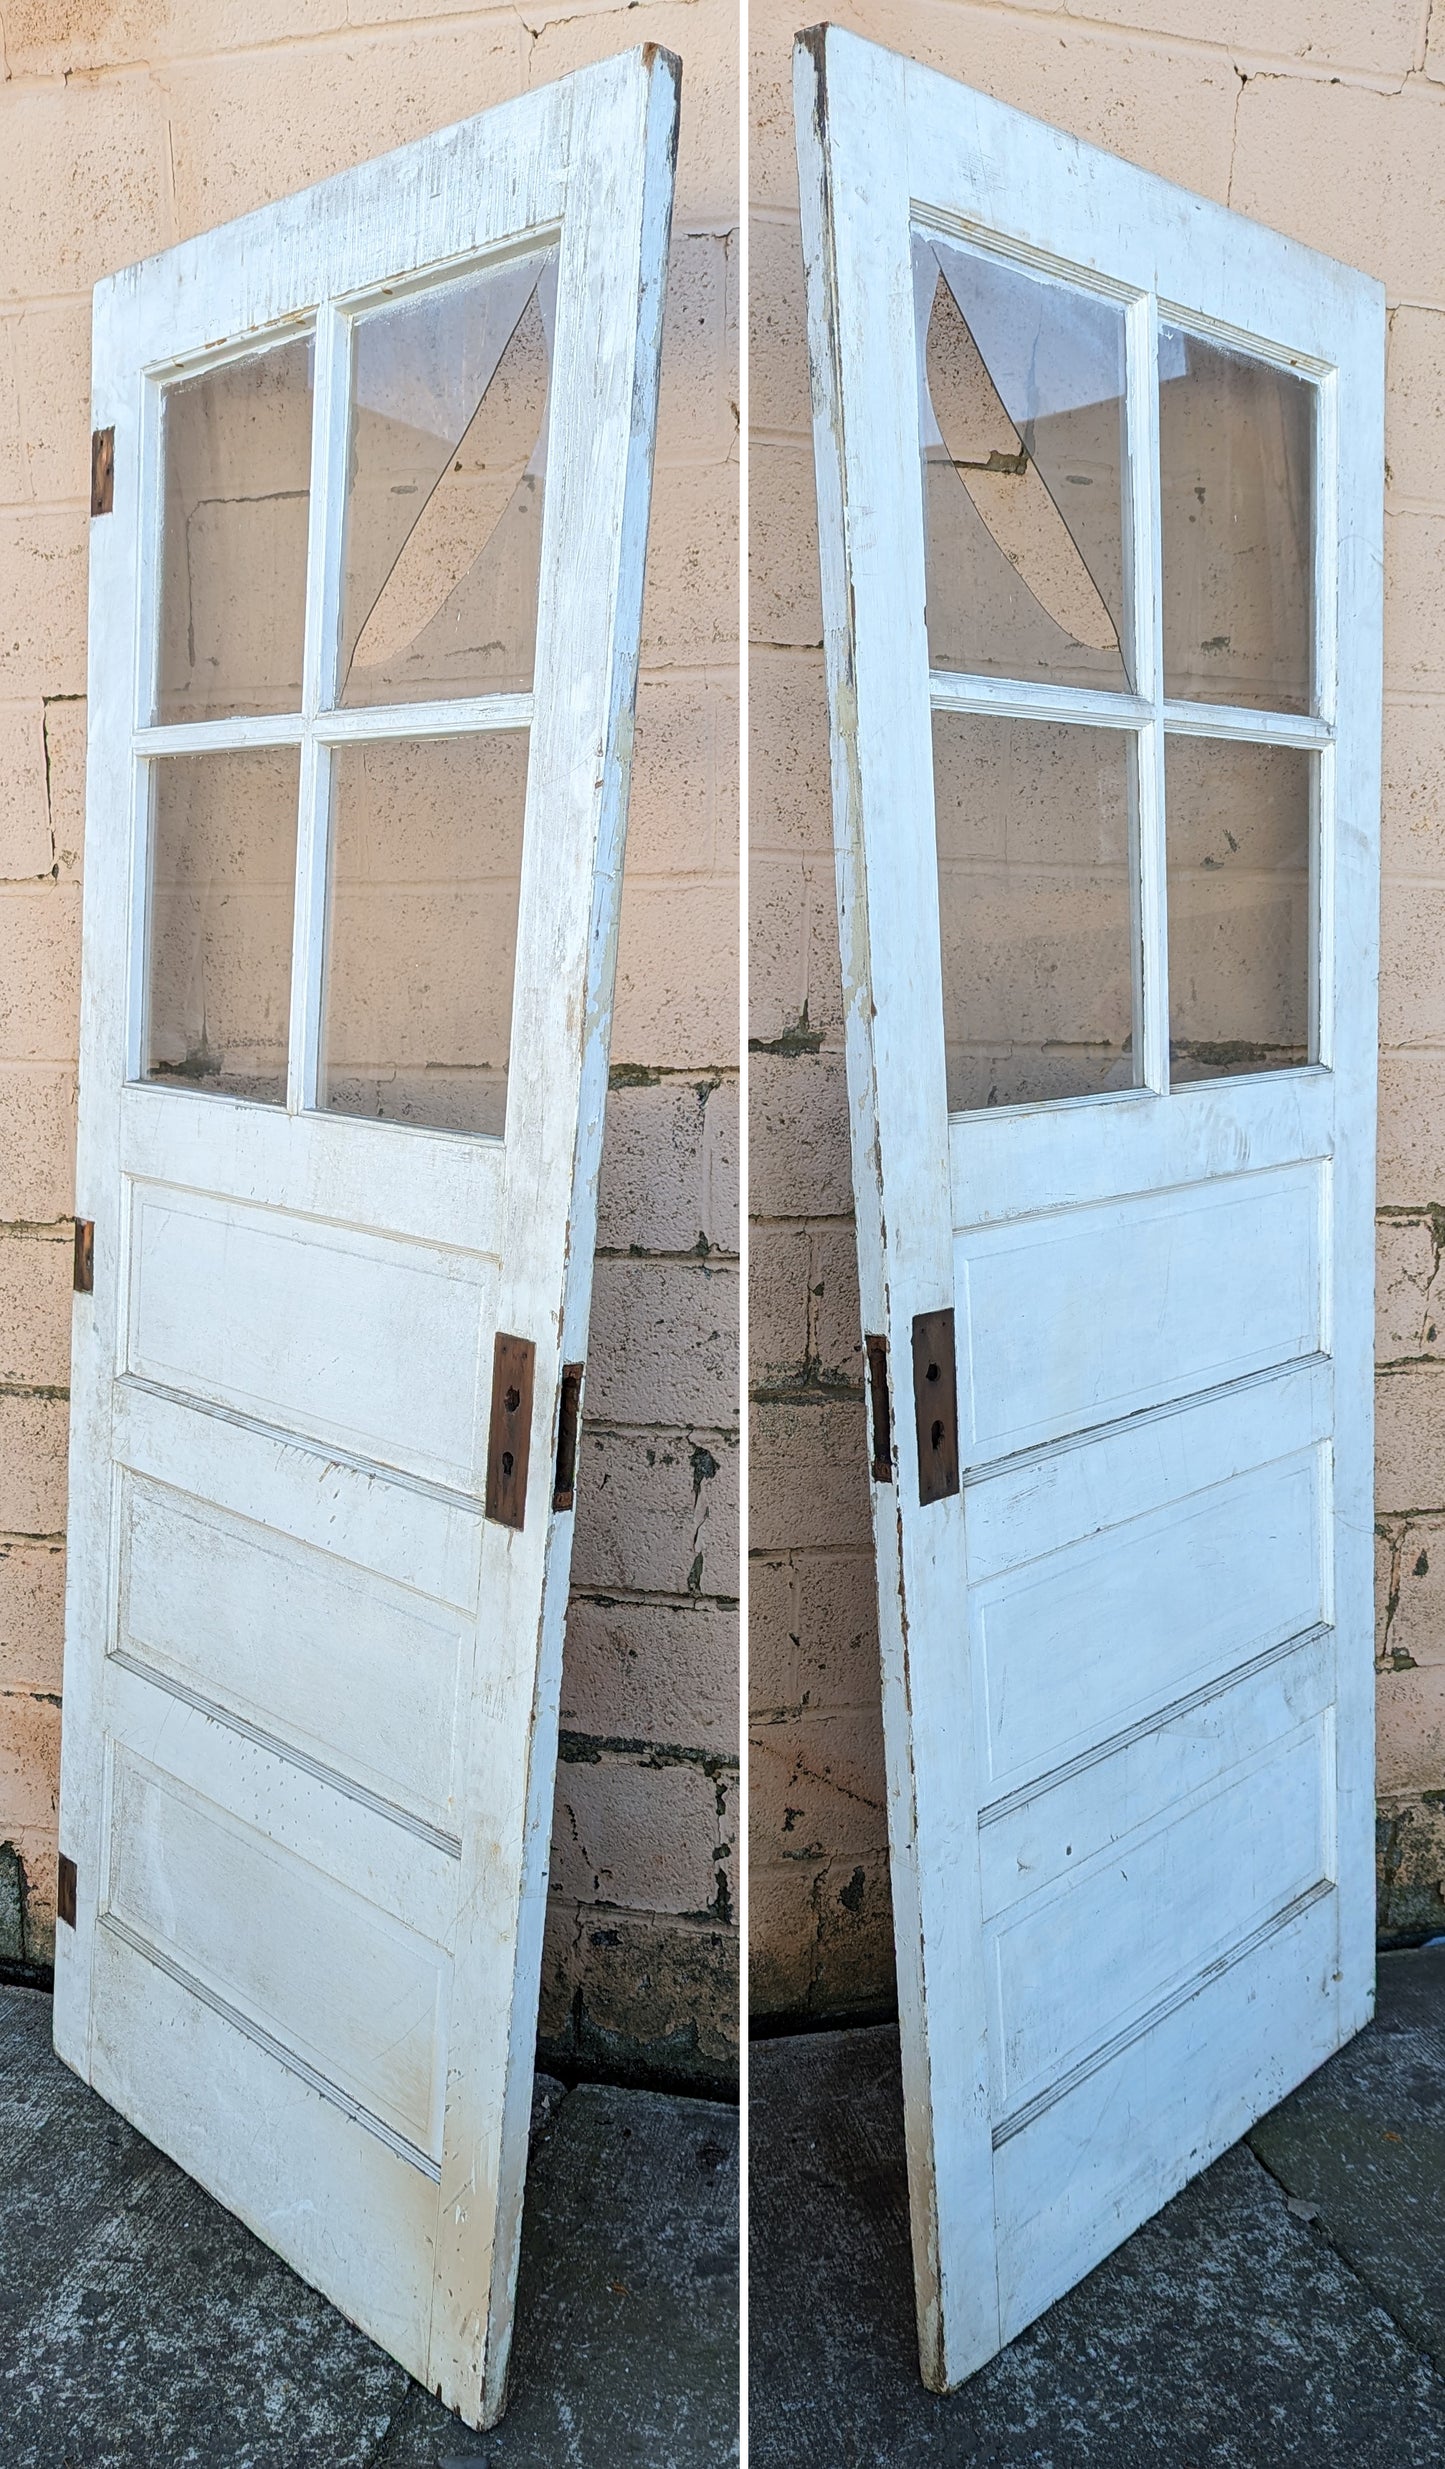 35.5x84" Antique Vintage Old Reclaimed Salvaged SOLID Wood Wooden Exterior Entry Door Window Wavy Glass